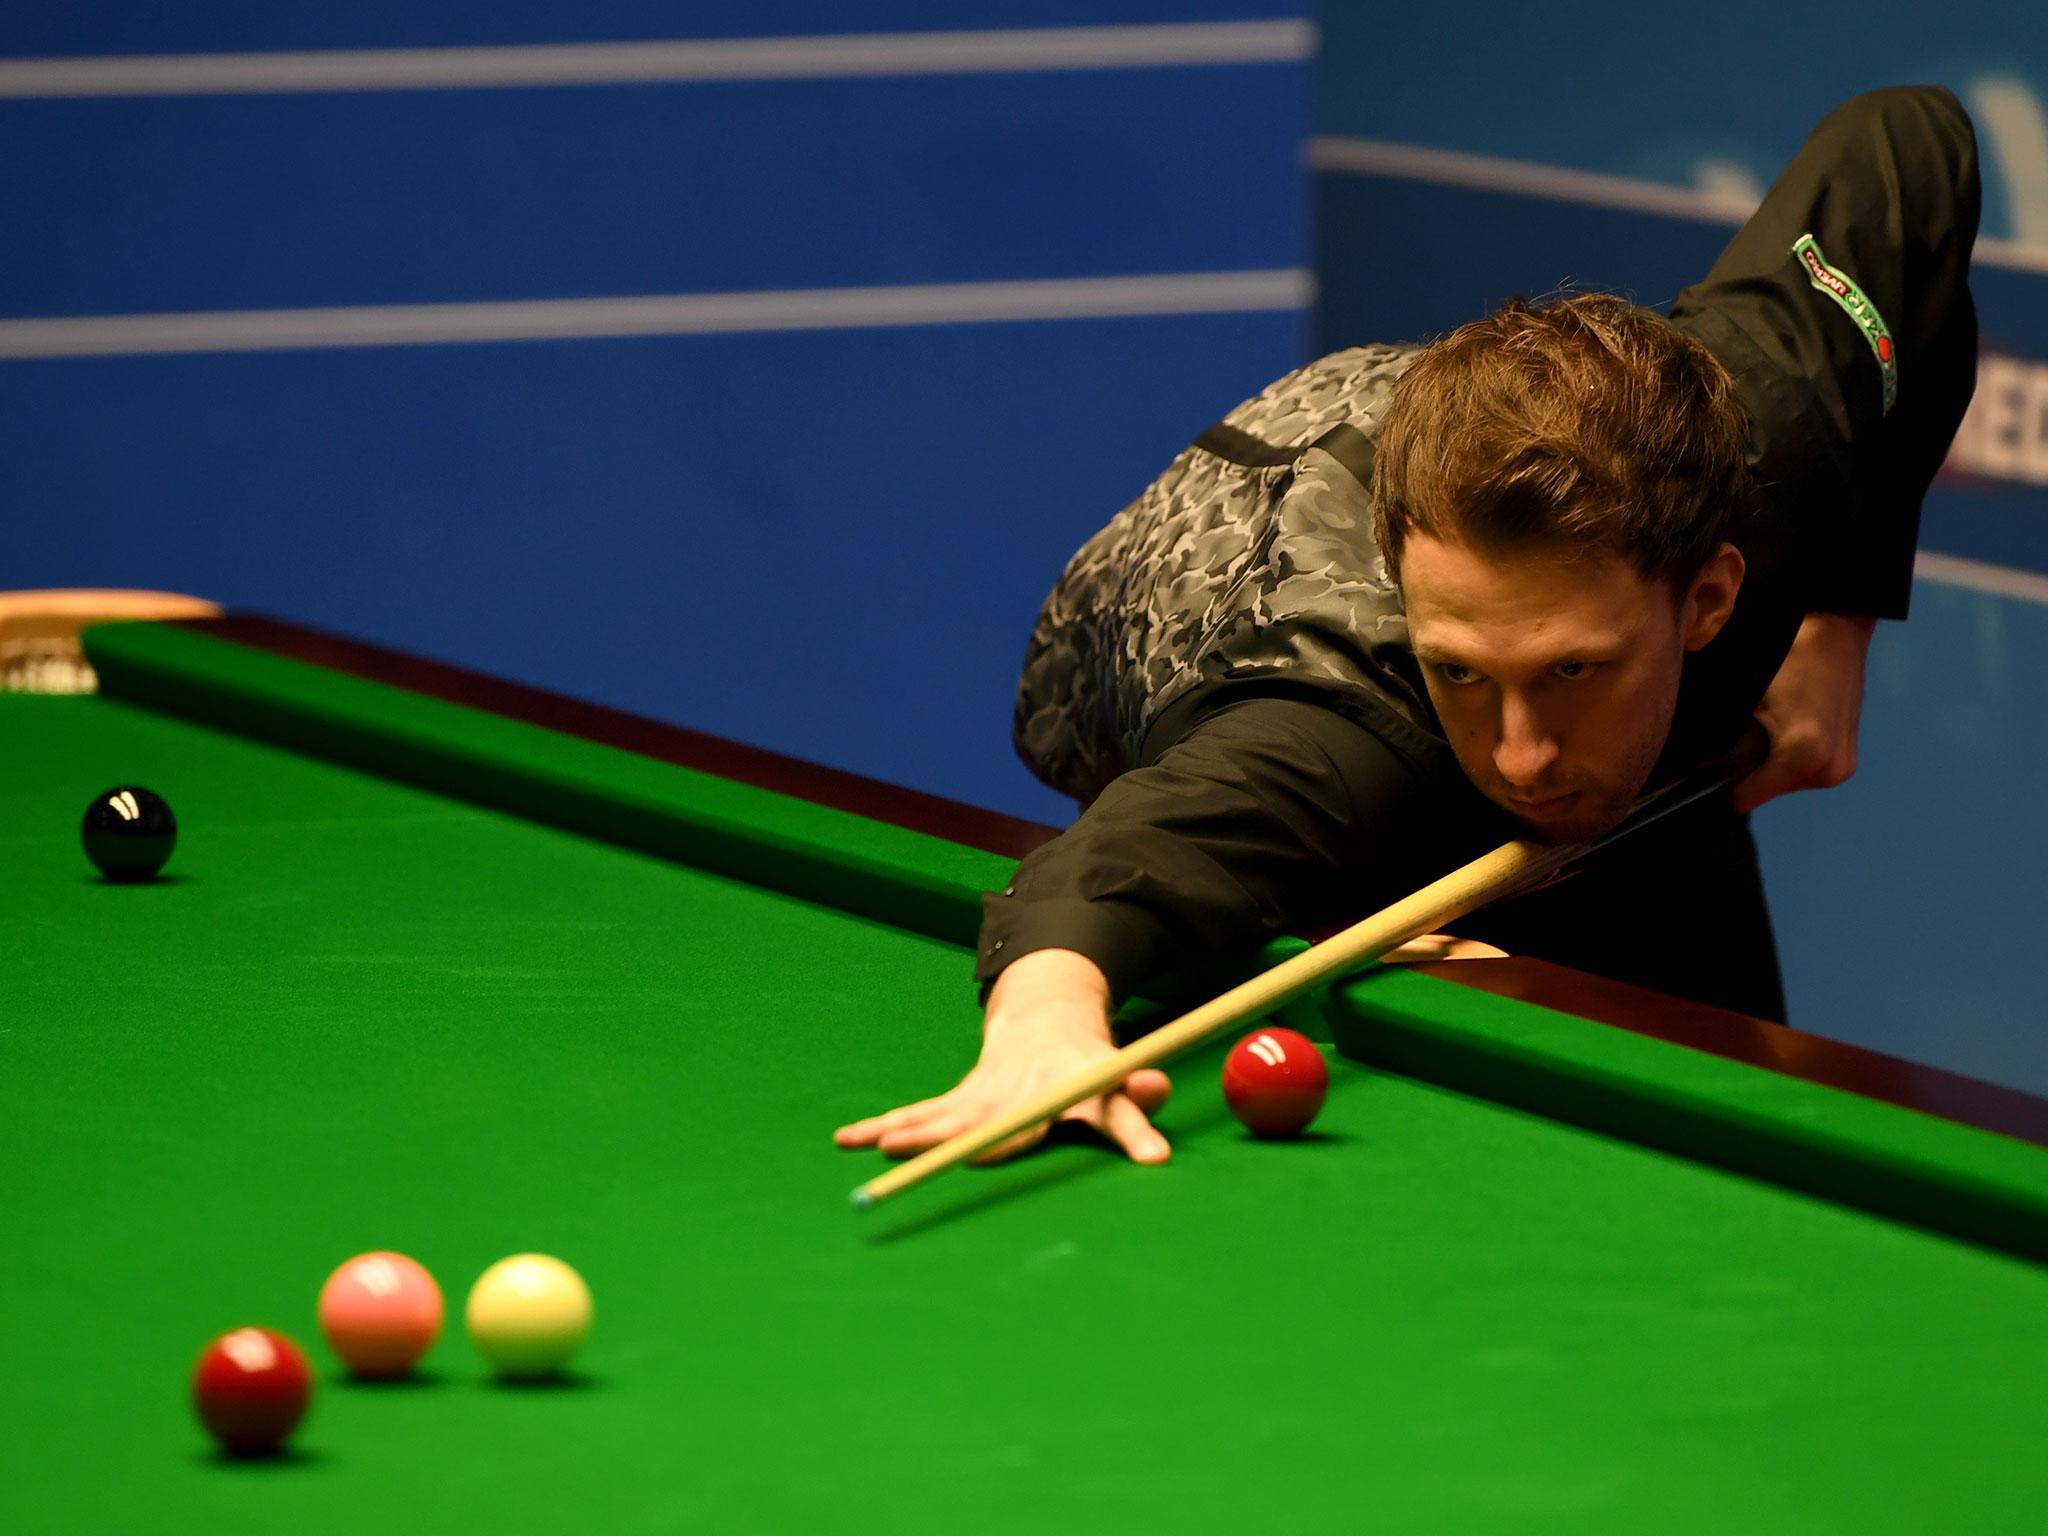 Judd Trump refused to speak to the press following his first round exit at the Crucible